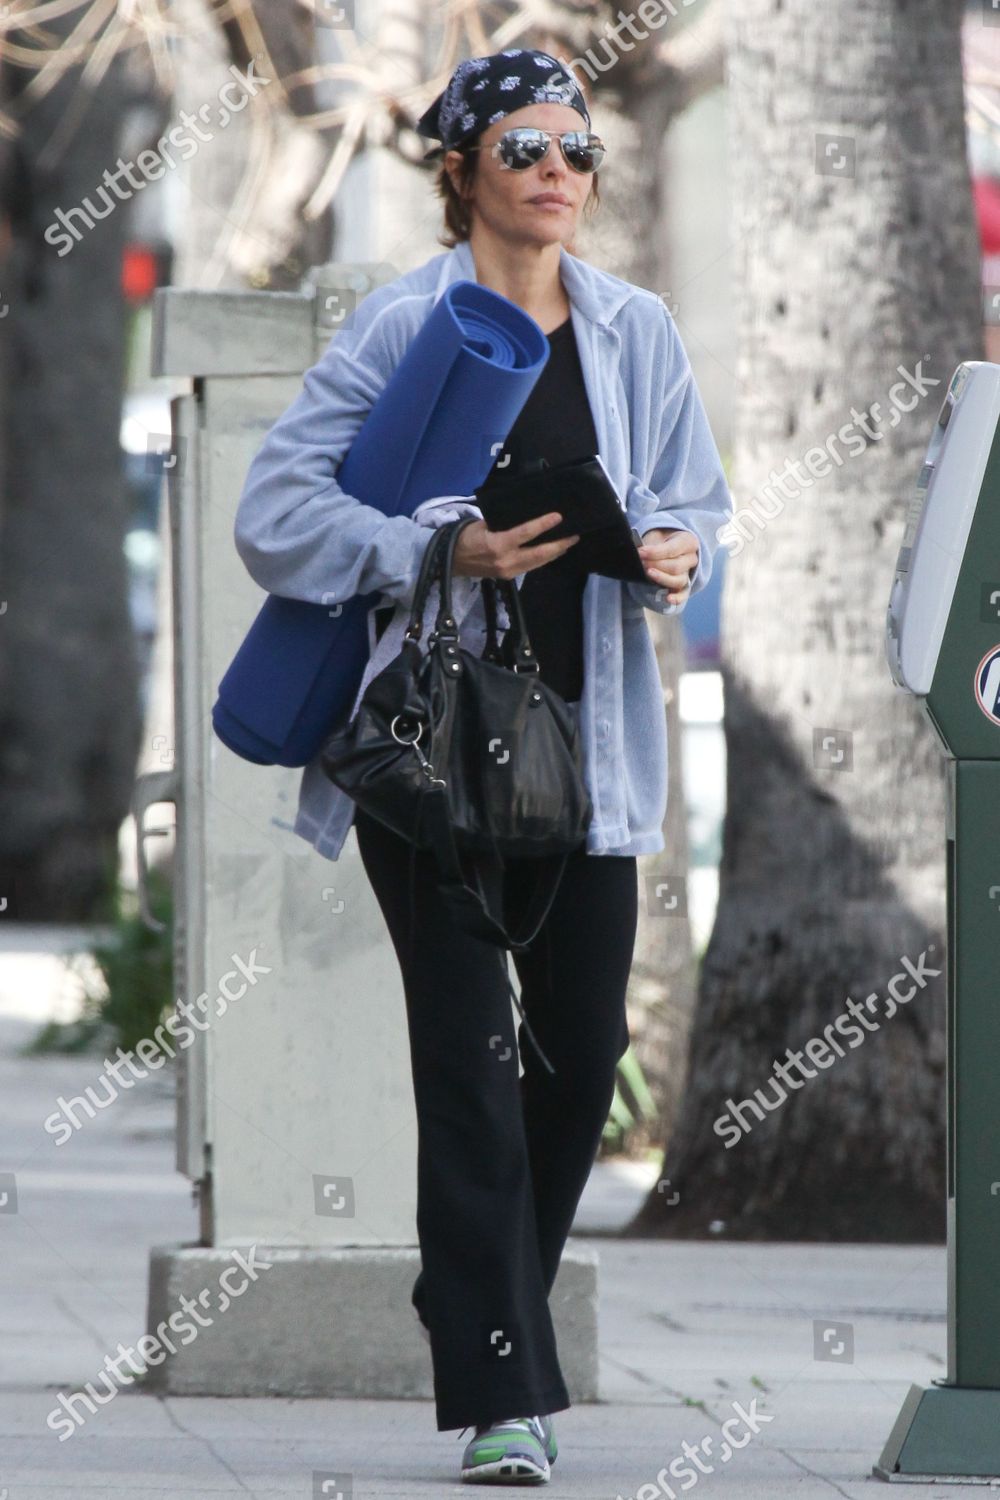 Lisa Rinna carrying large shopping bags outside Barneys New York in Beverly  Hills Los Angeles, California - 26.06.08 Stock Photo - Alamy